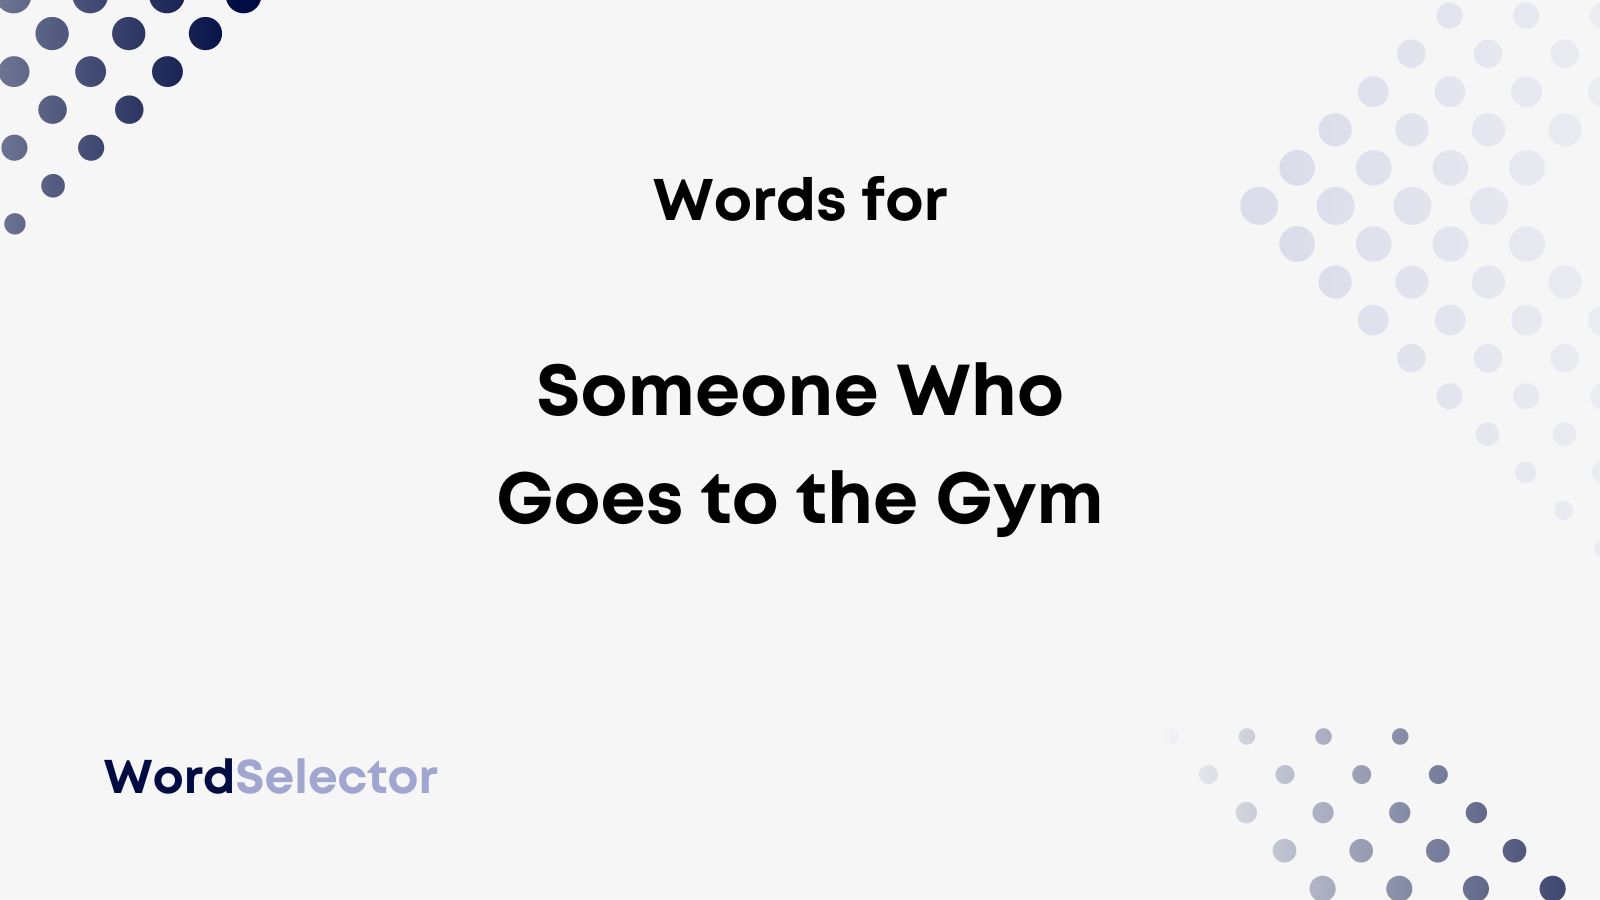 Gym rat - Definition, Meaning & Synonyms